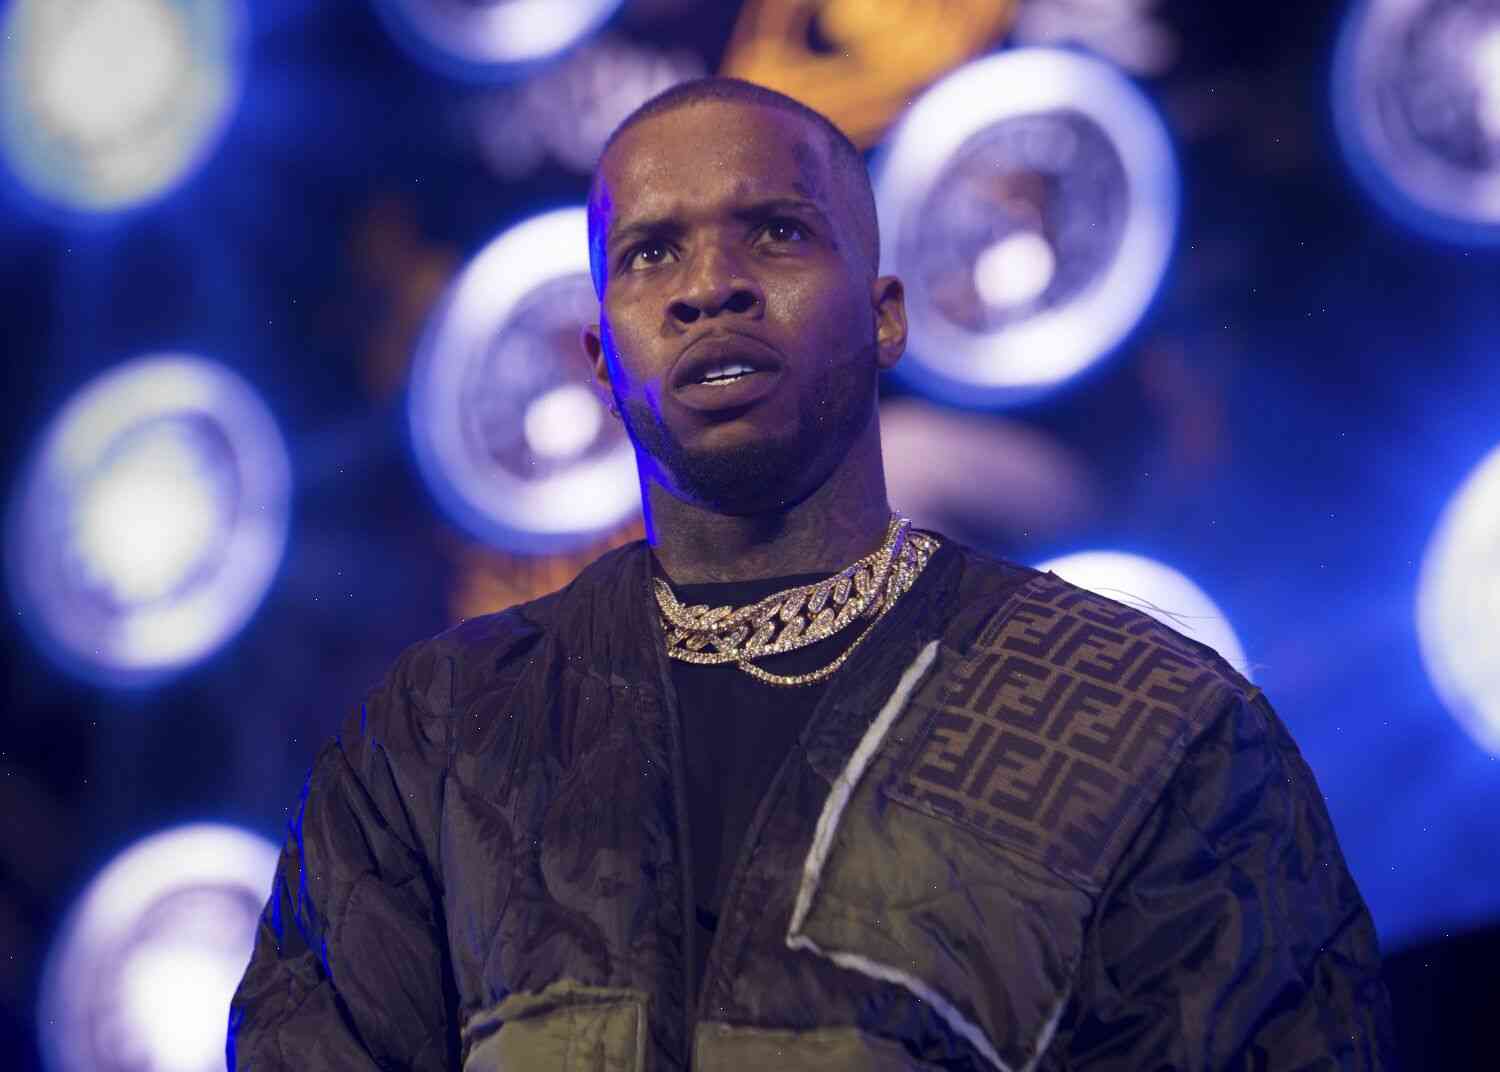 Tory Lanez is facing house arrest in hopes of a jury trial